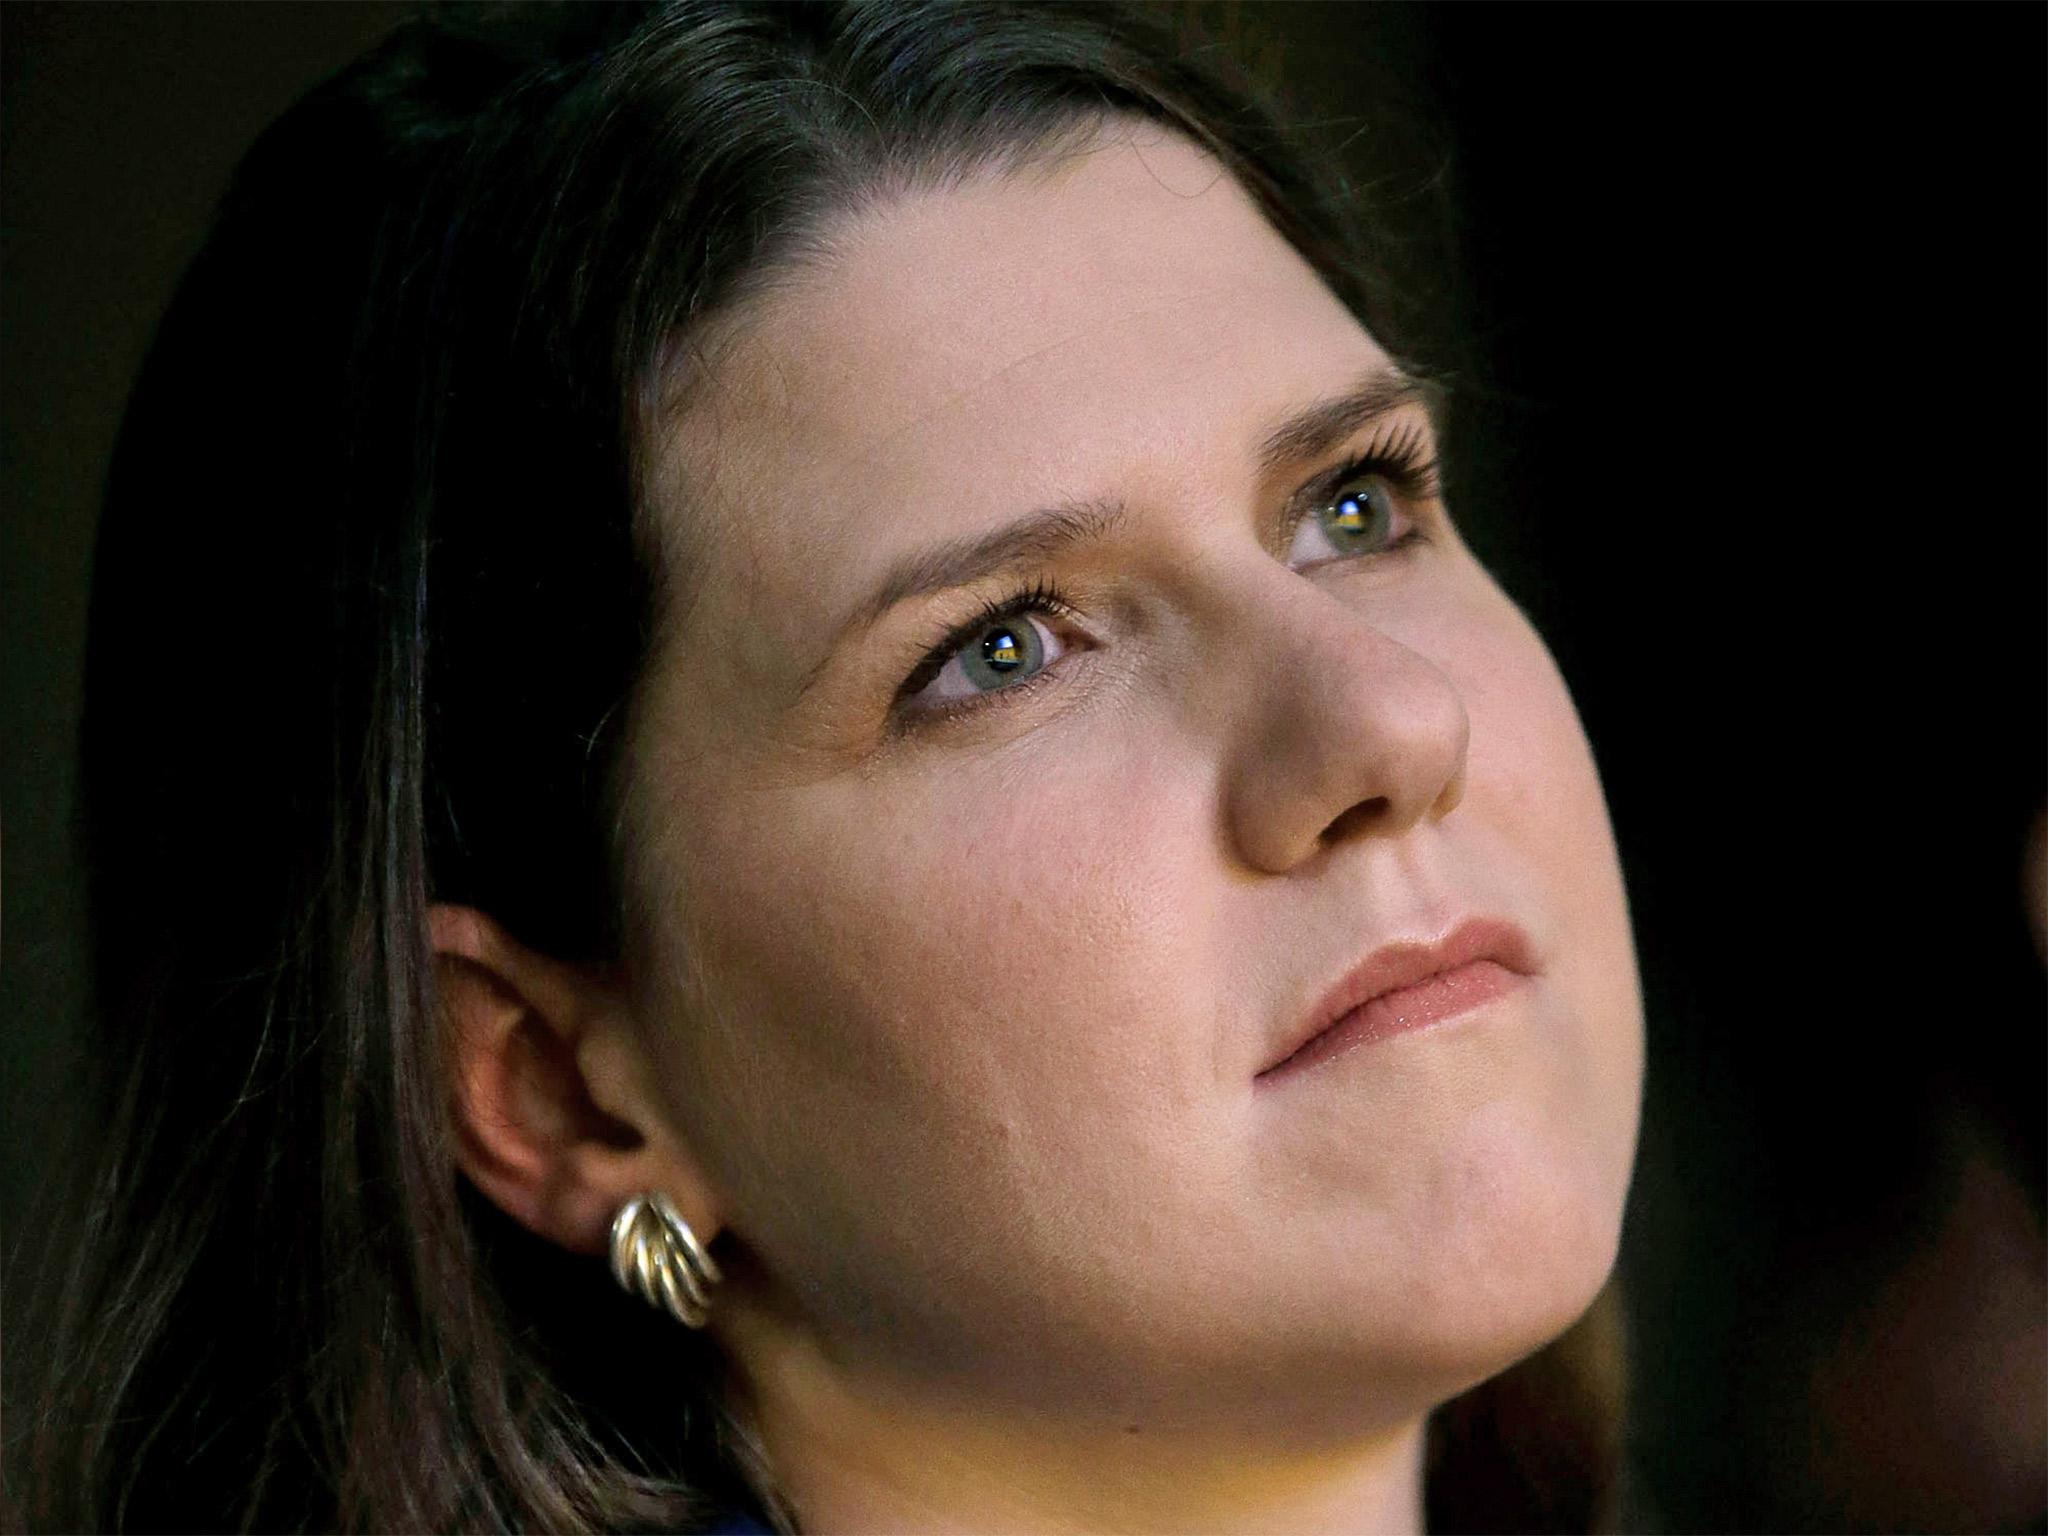 Jo Swinson said 'habits of care' should be seen as 'just as appropriate for boys and men'